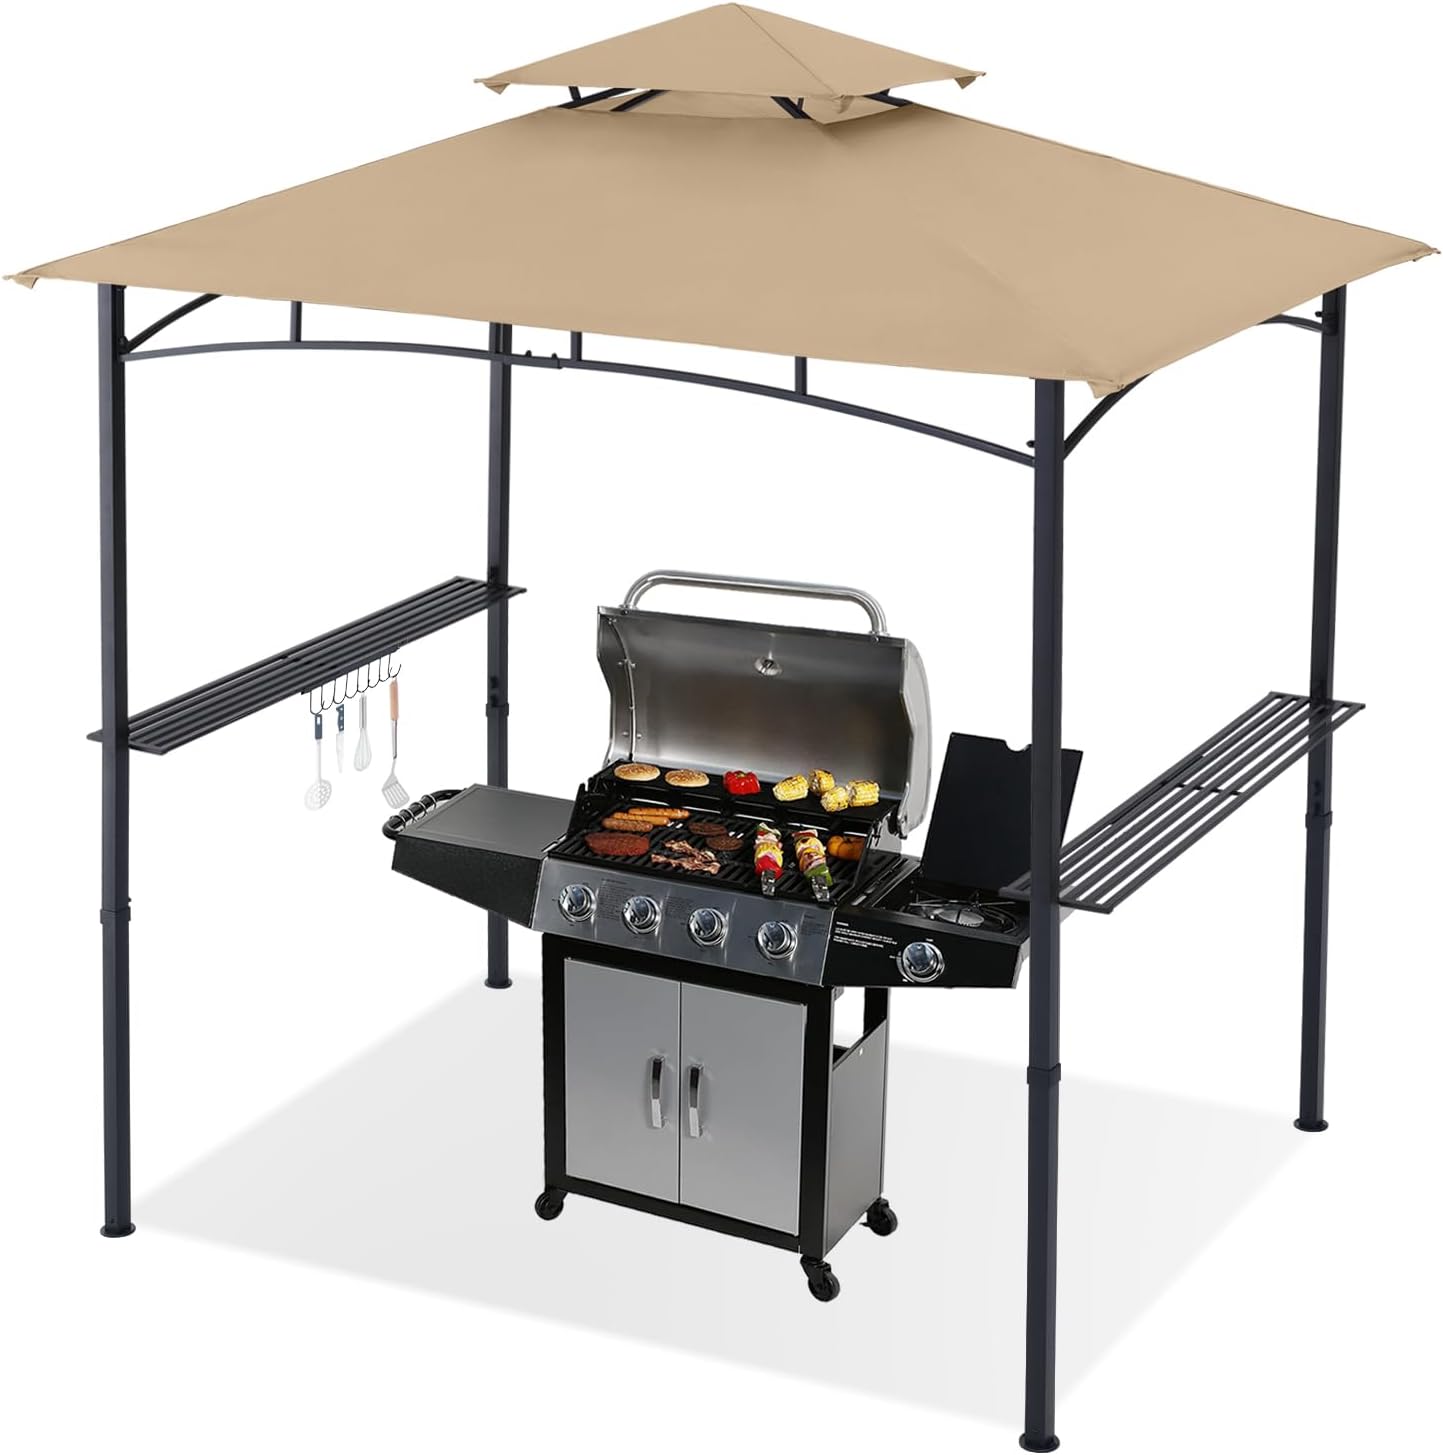 Outdoor 8x5 Grill Gazebo Shelter for BBQ with LED Light